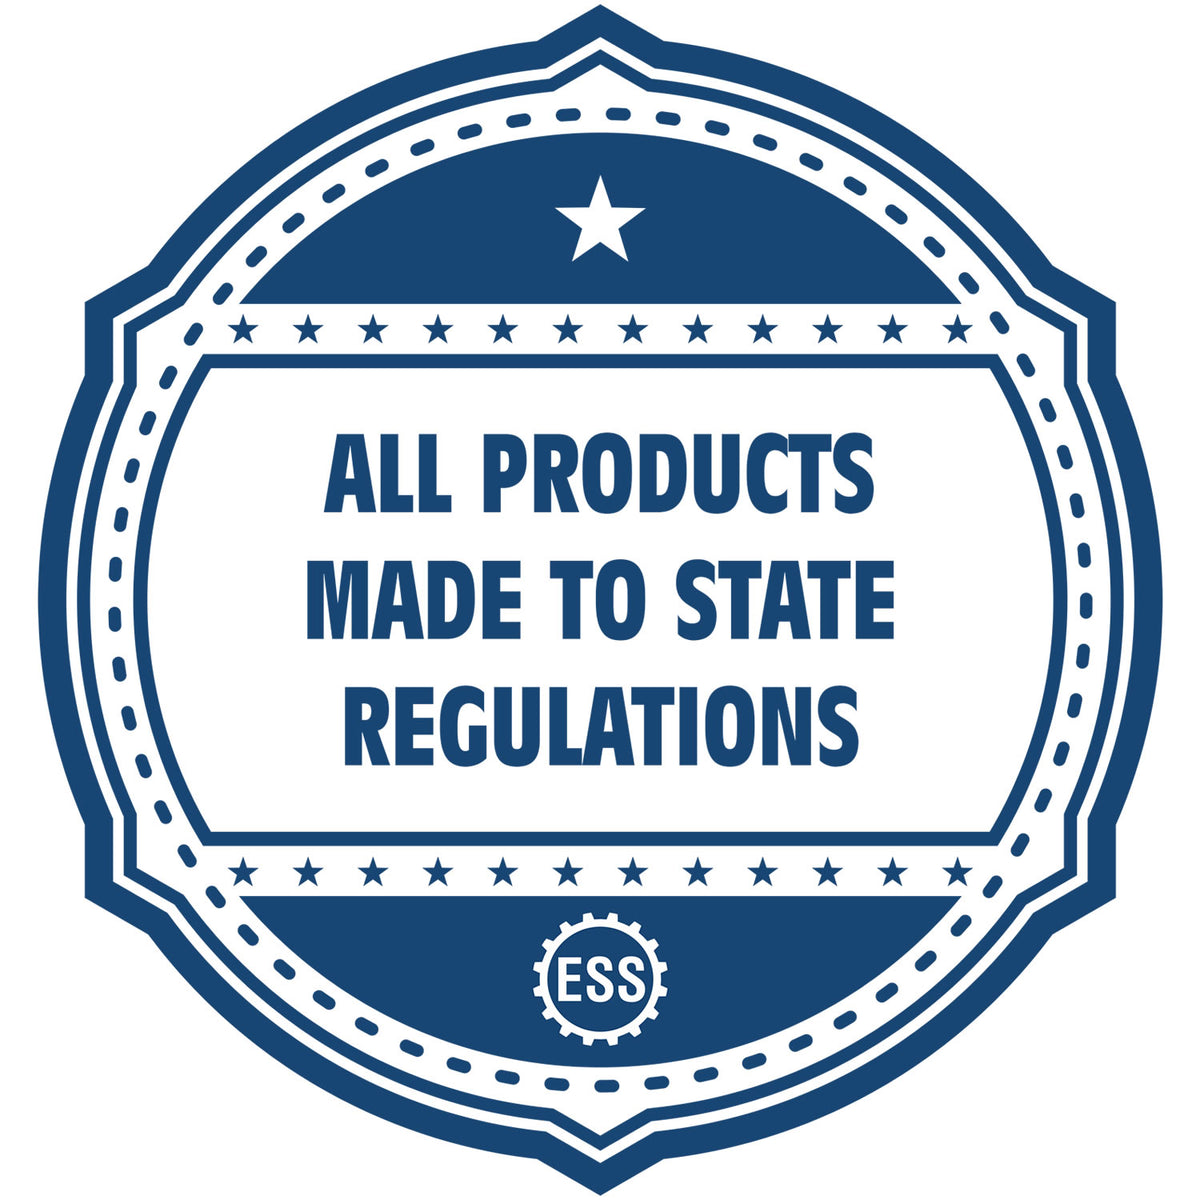 A blue icon or badge for the Gift Georgia Architect Seal showing that this product is made in compliance with state regulations.